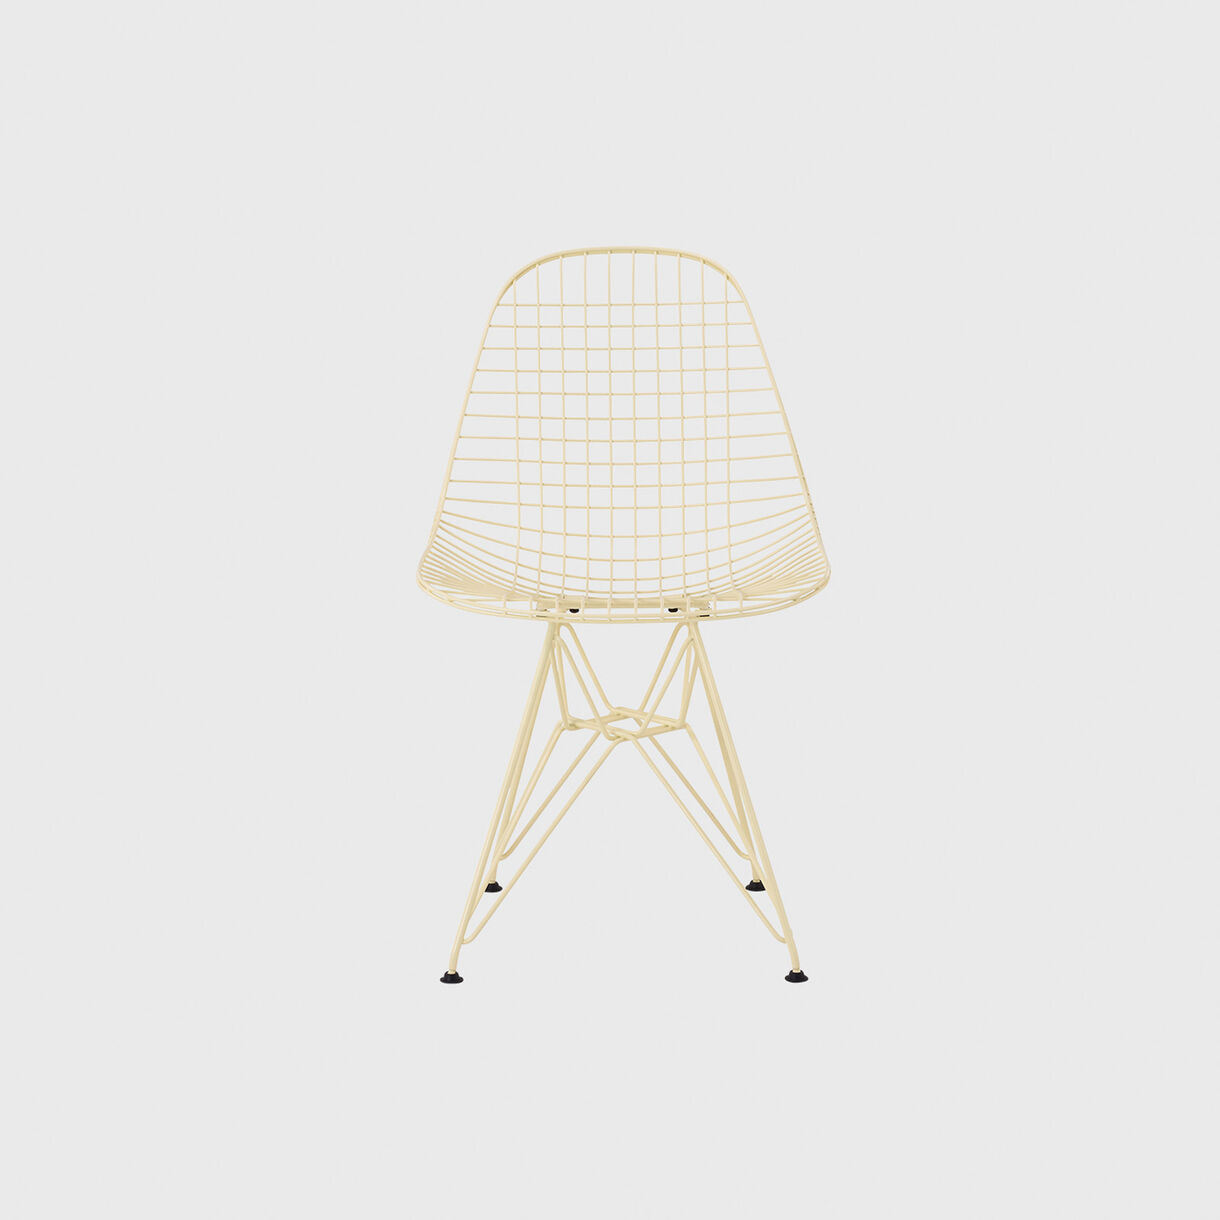 HM x Hay Eames Wire Outdoor Chair, Wire Base, Powder Yellow